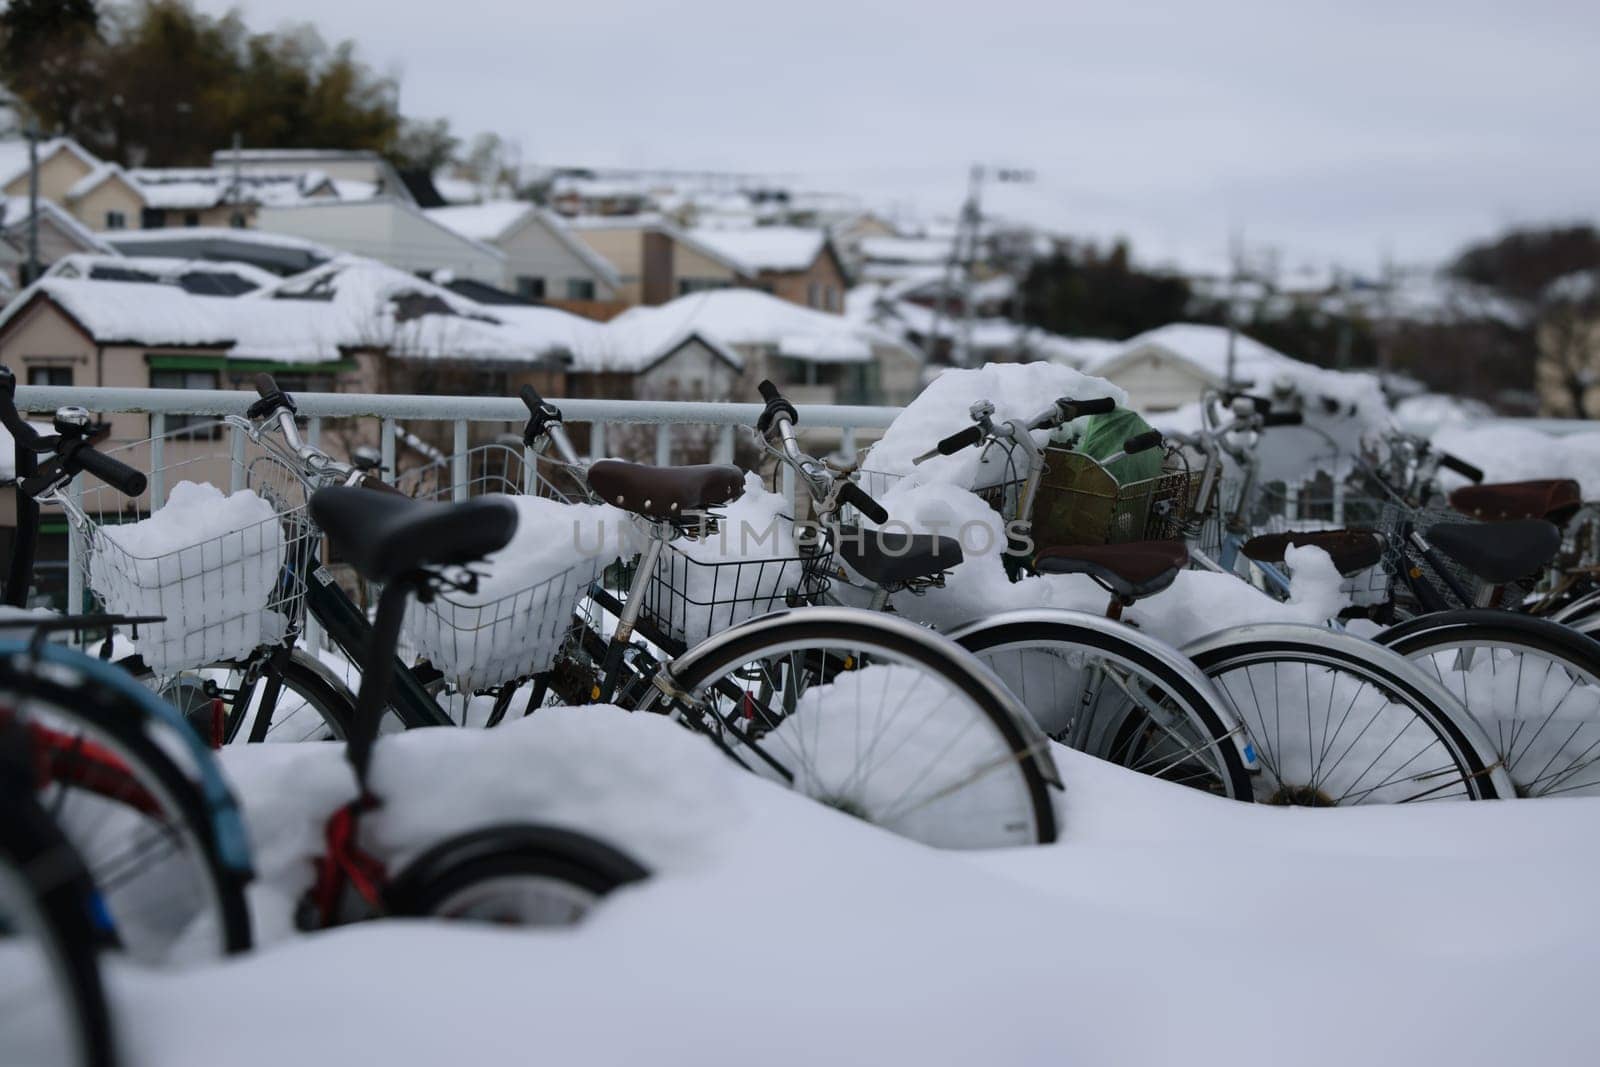 Bicycles covered in snow with blurred residential area in the background. by jameshumble